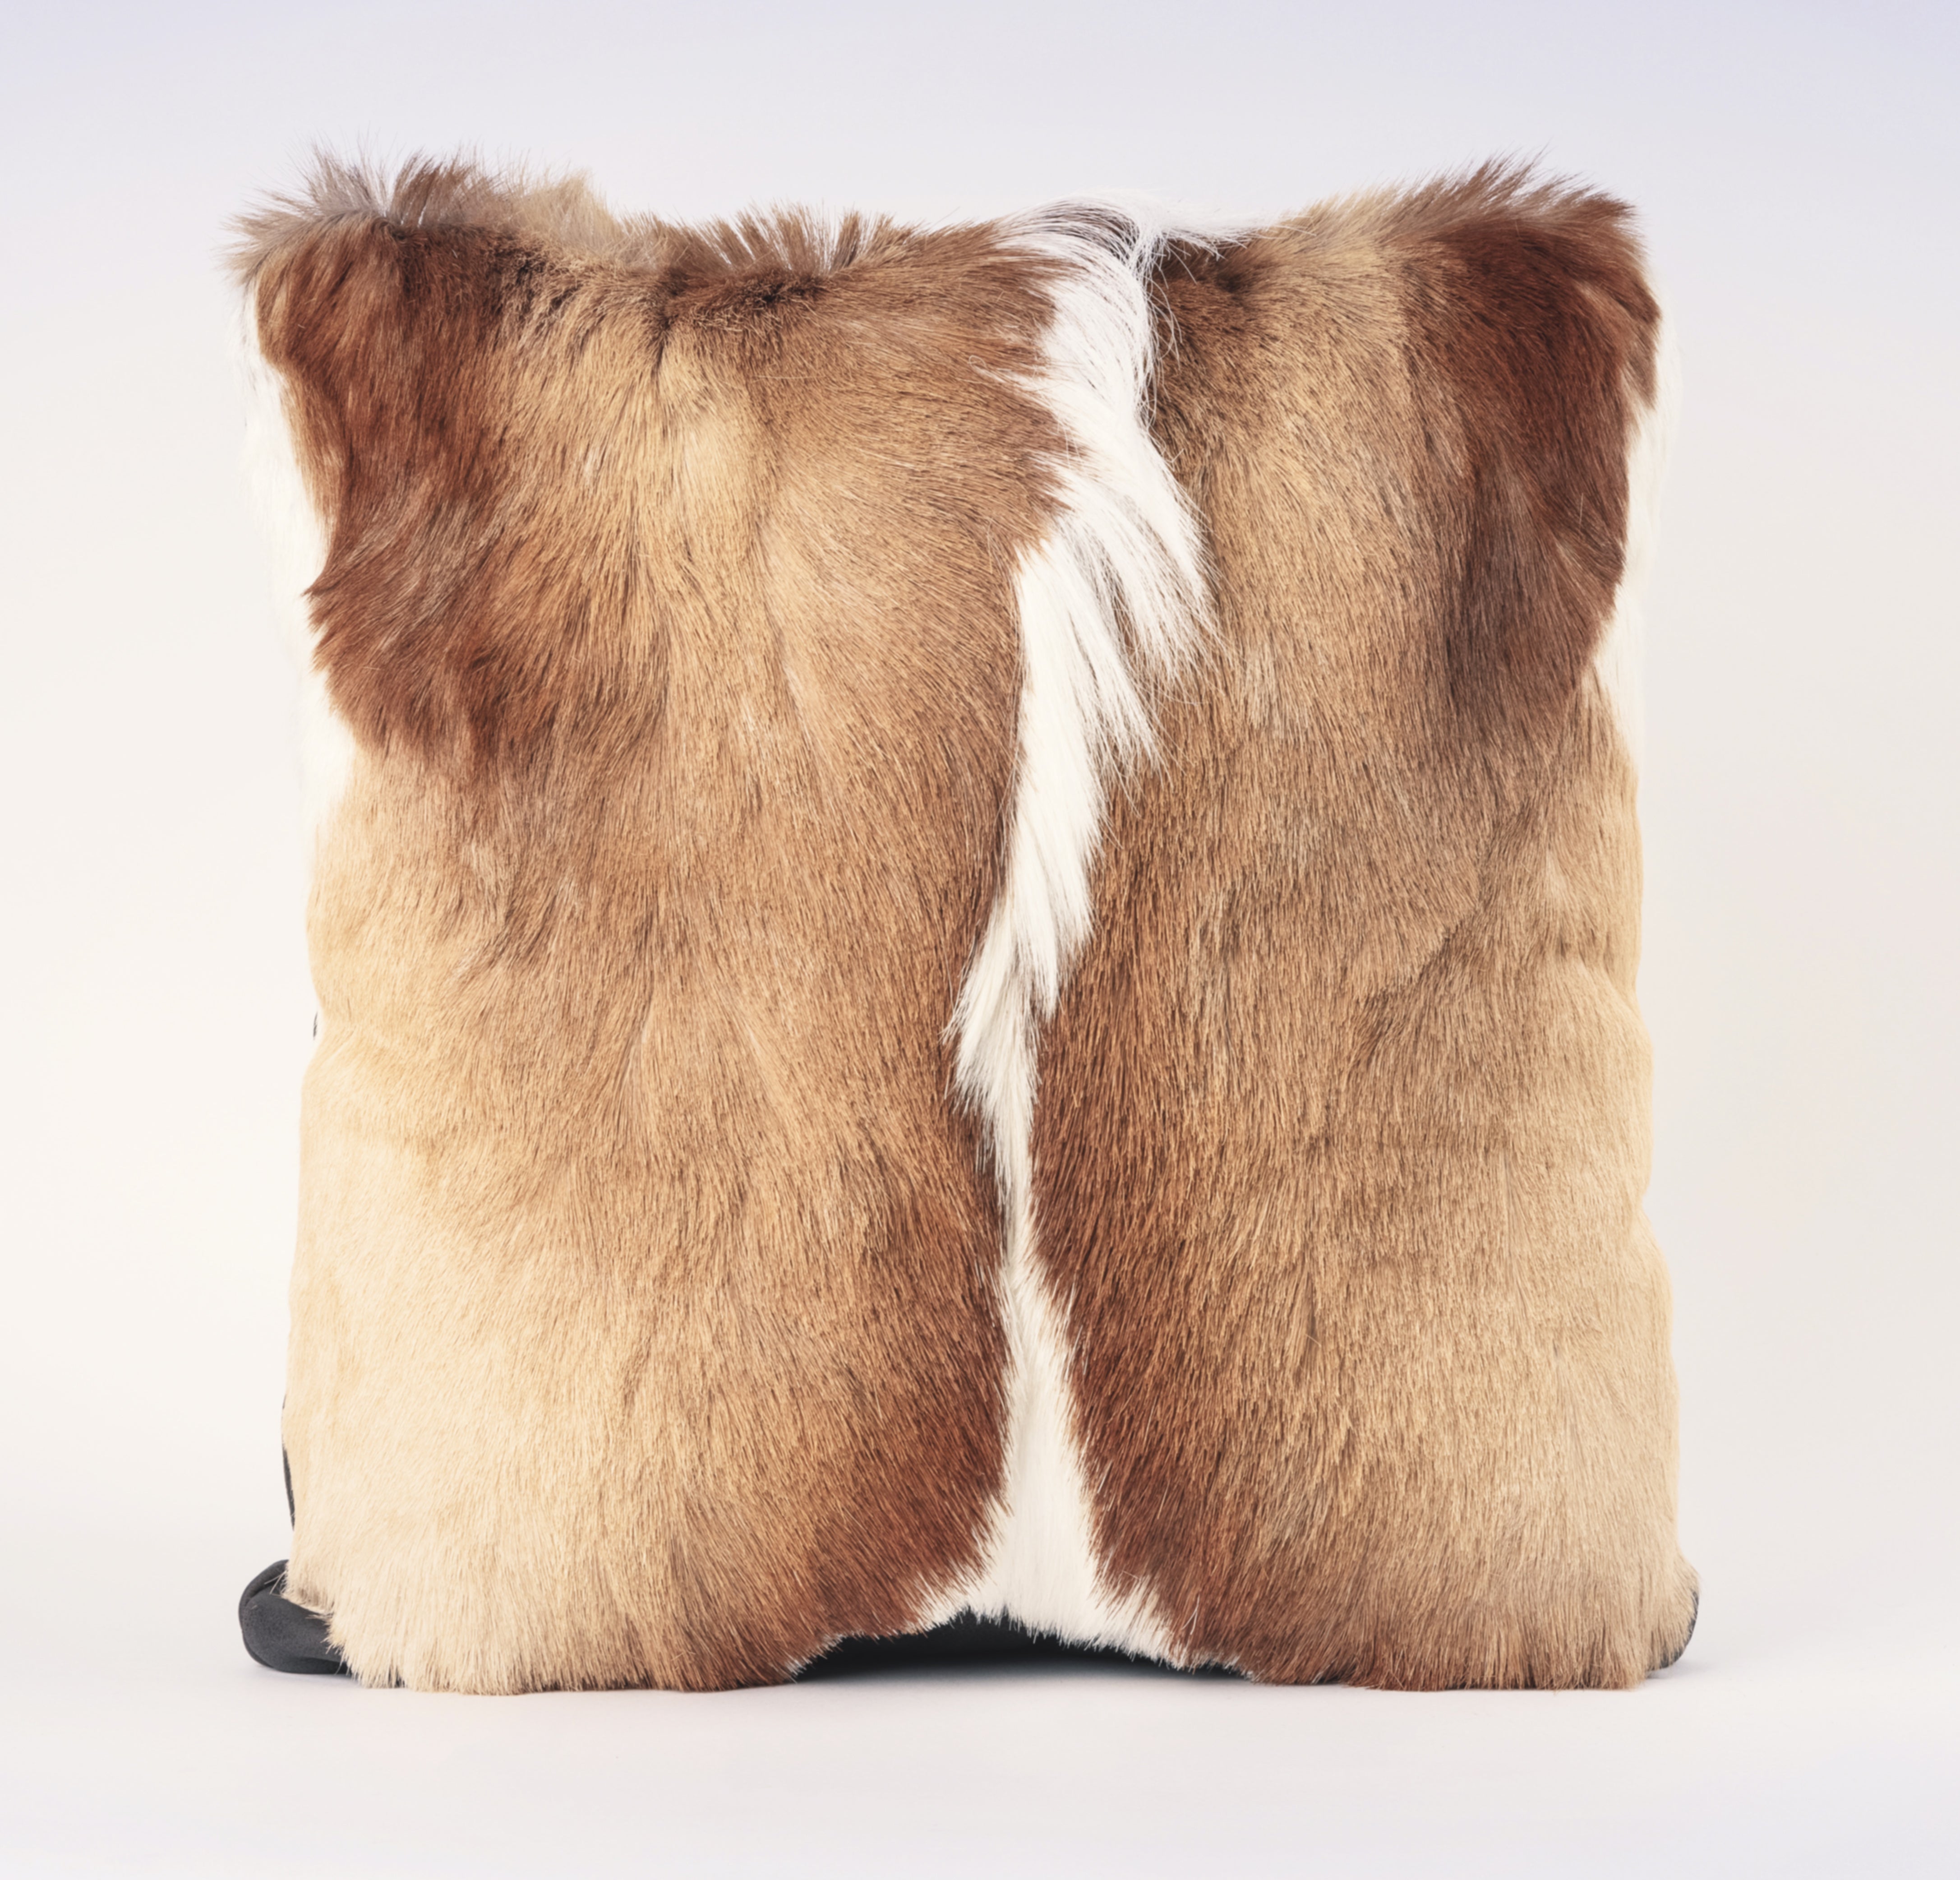 Springbok fur front and cloth back.